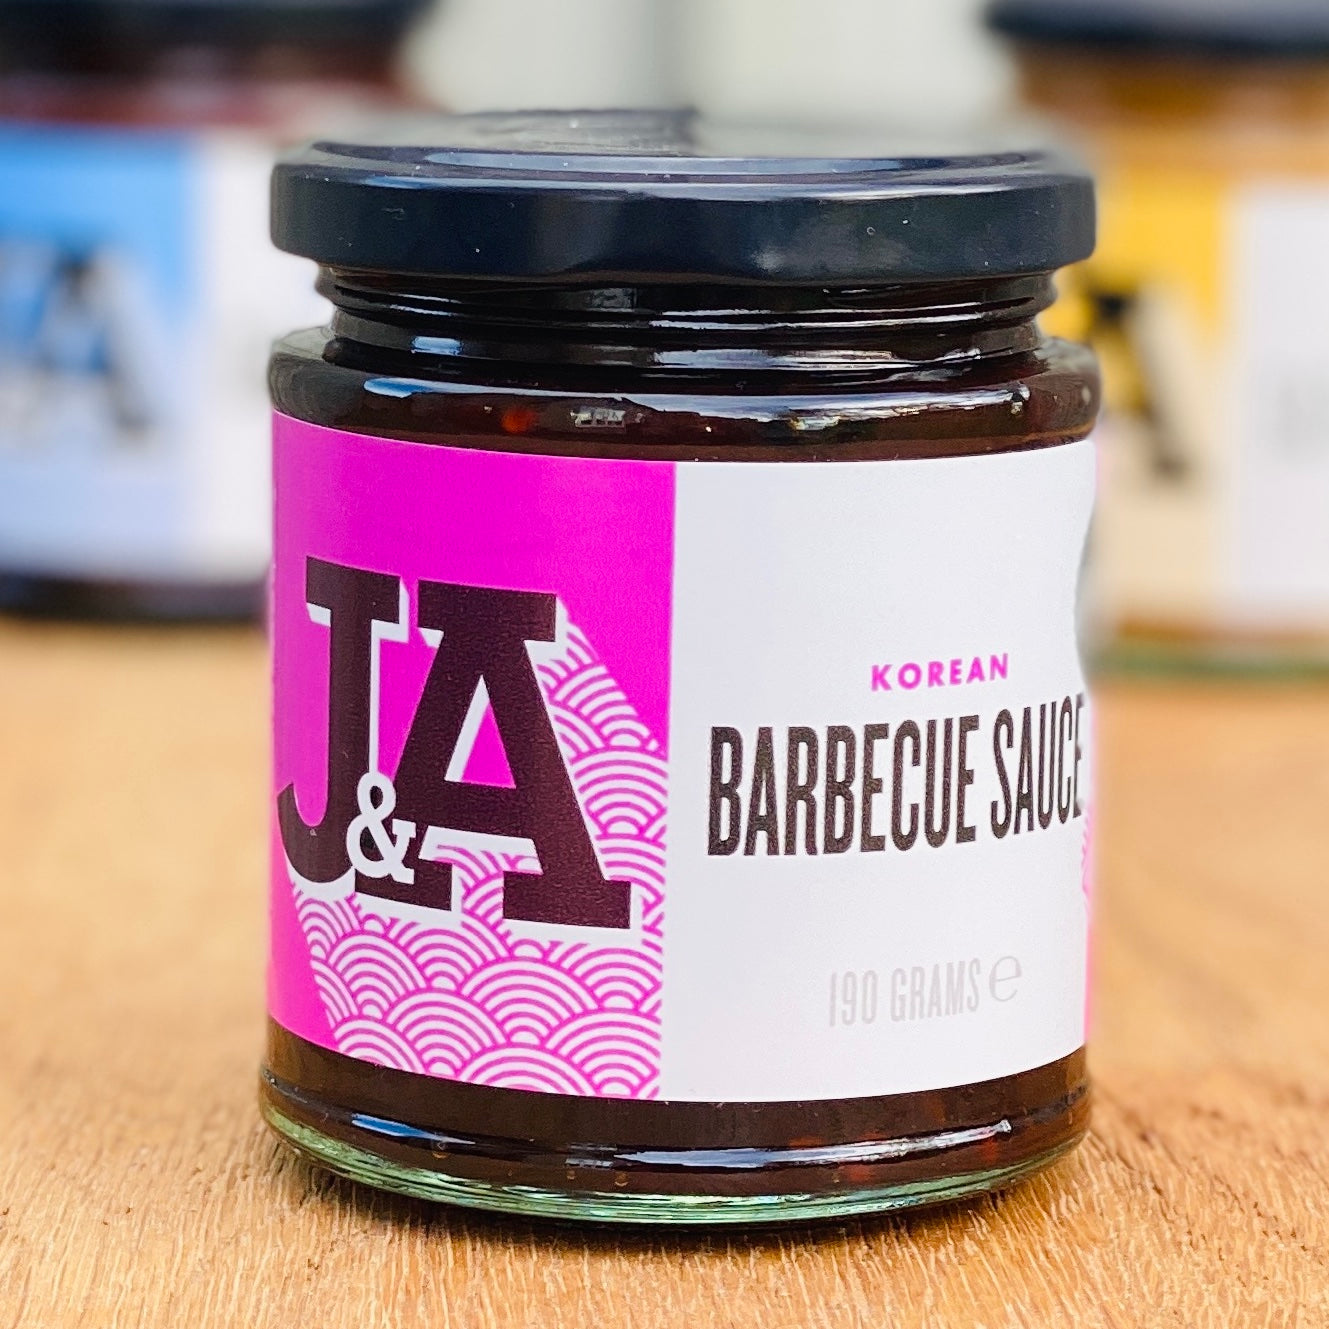 Janda Korean Barbecue sauce. Suitable for marinade and stir frying